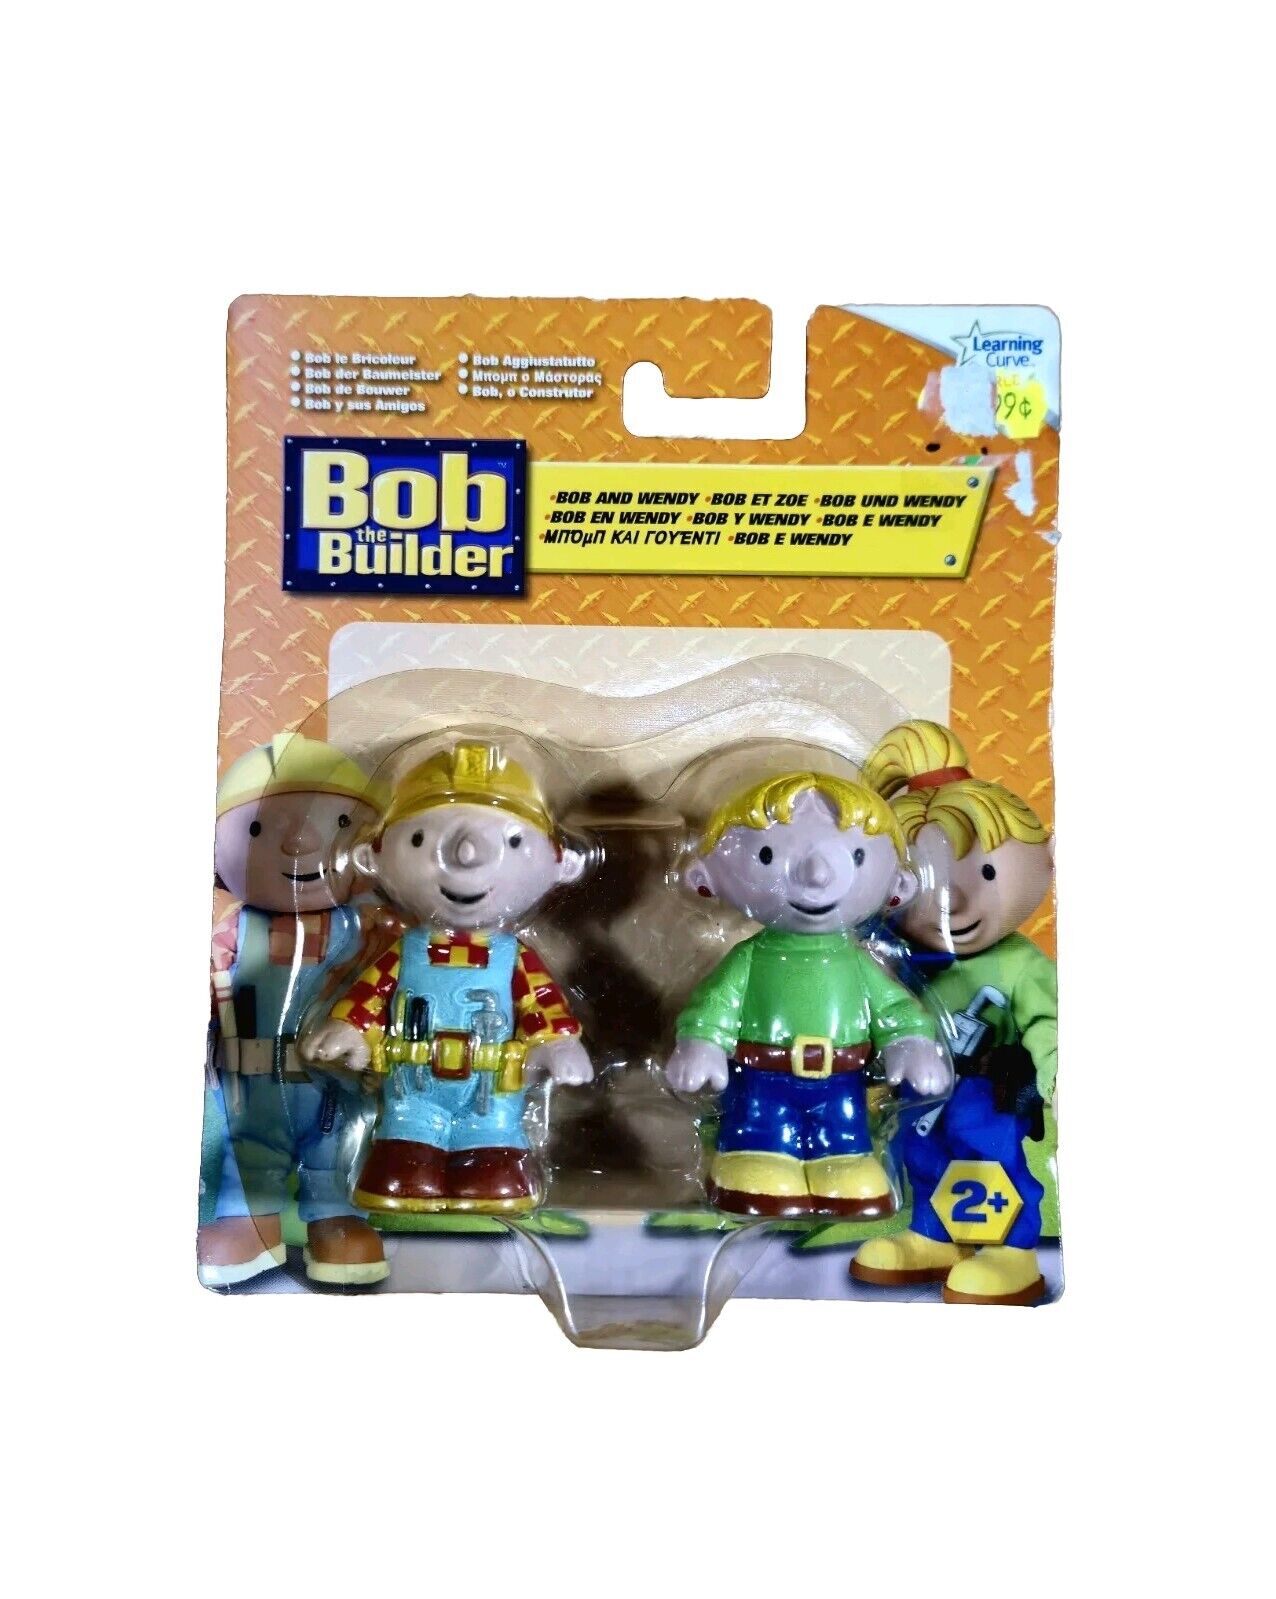 Bob The Builder and Wendy Figurine Toys - New & Sealed - Rare 2000s Collectable